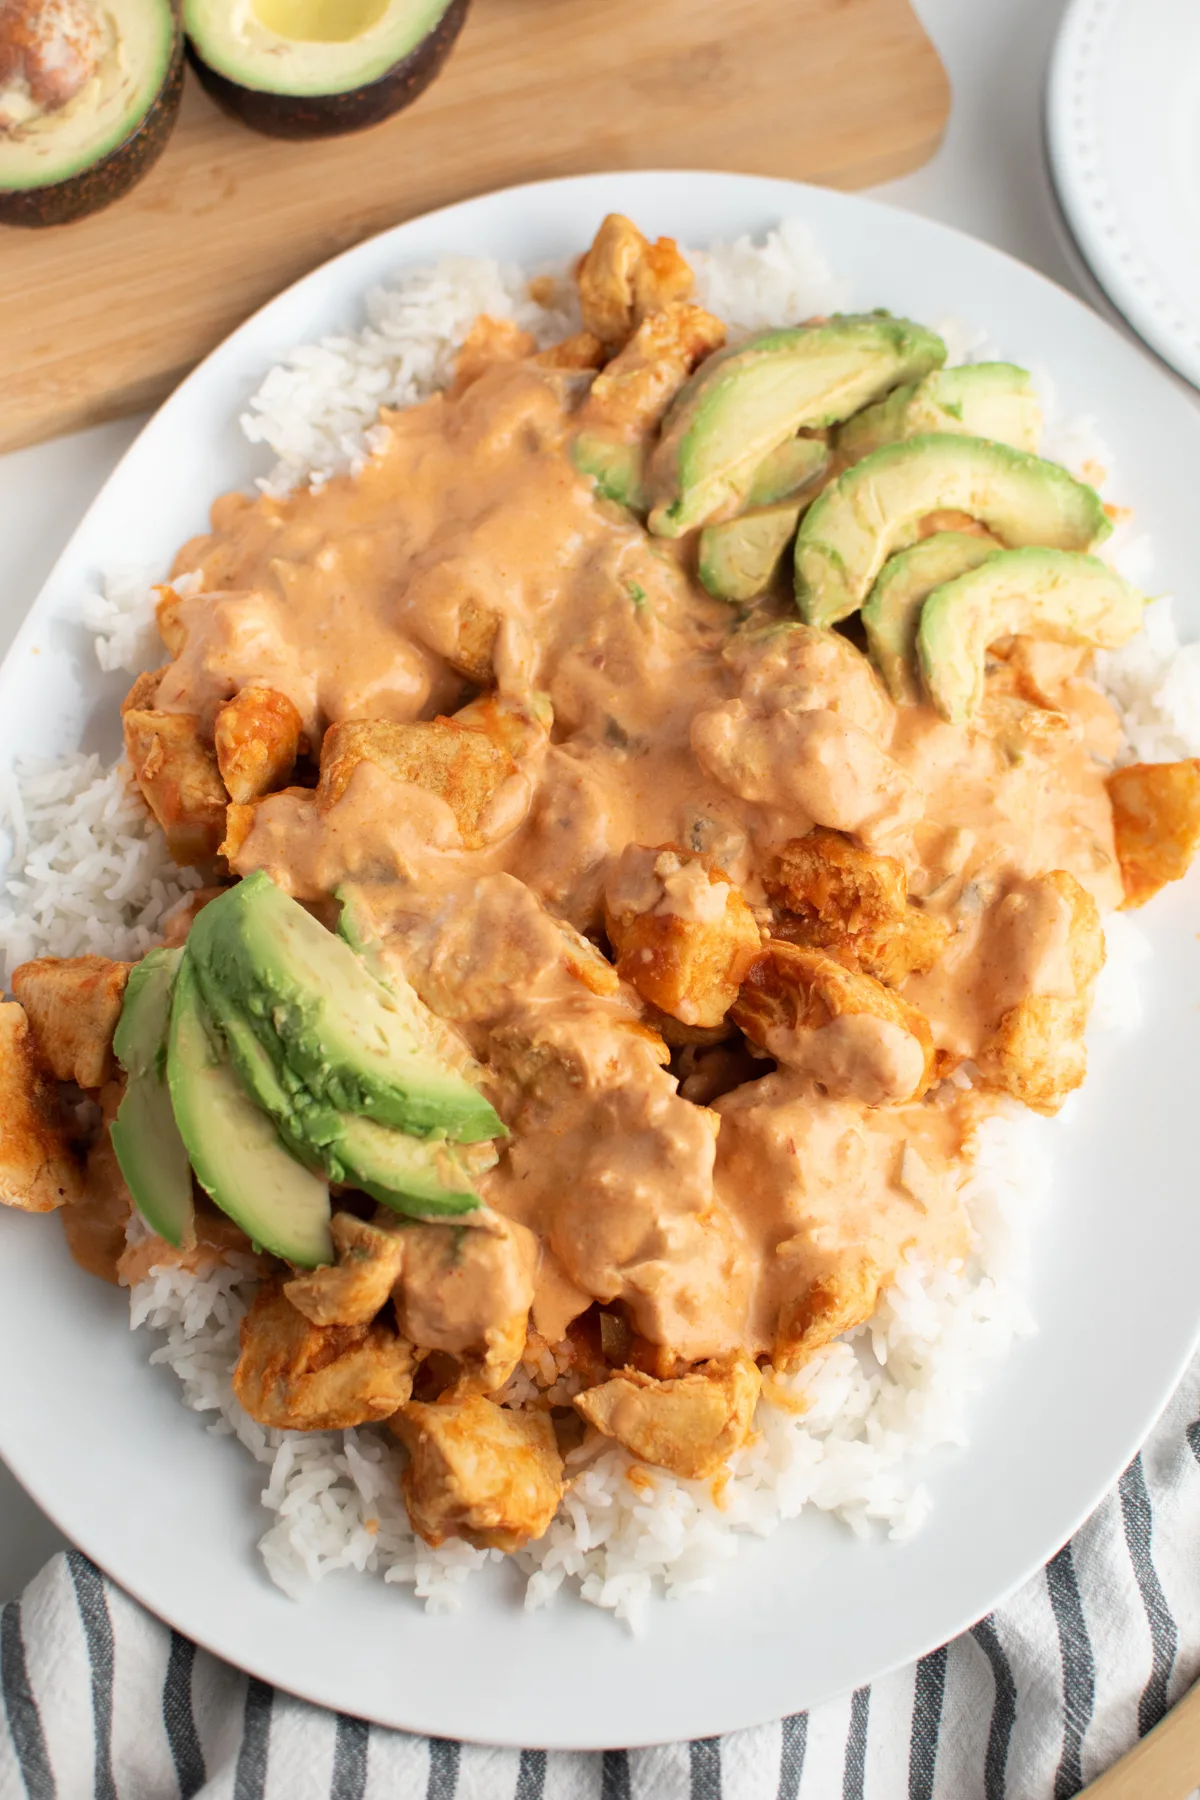 Picante chicken with avocado over rice next to cut avocado on cutting board.